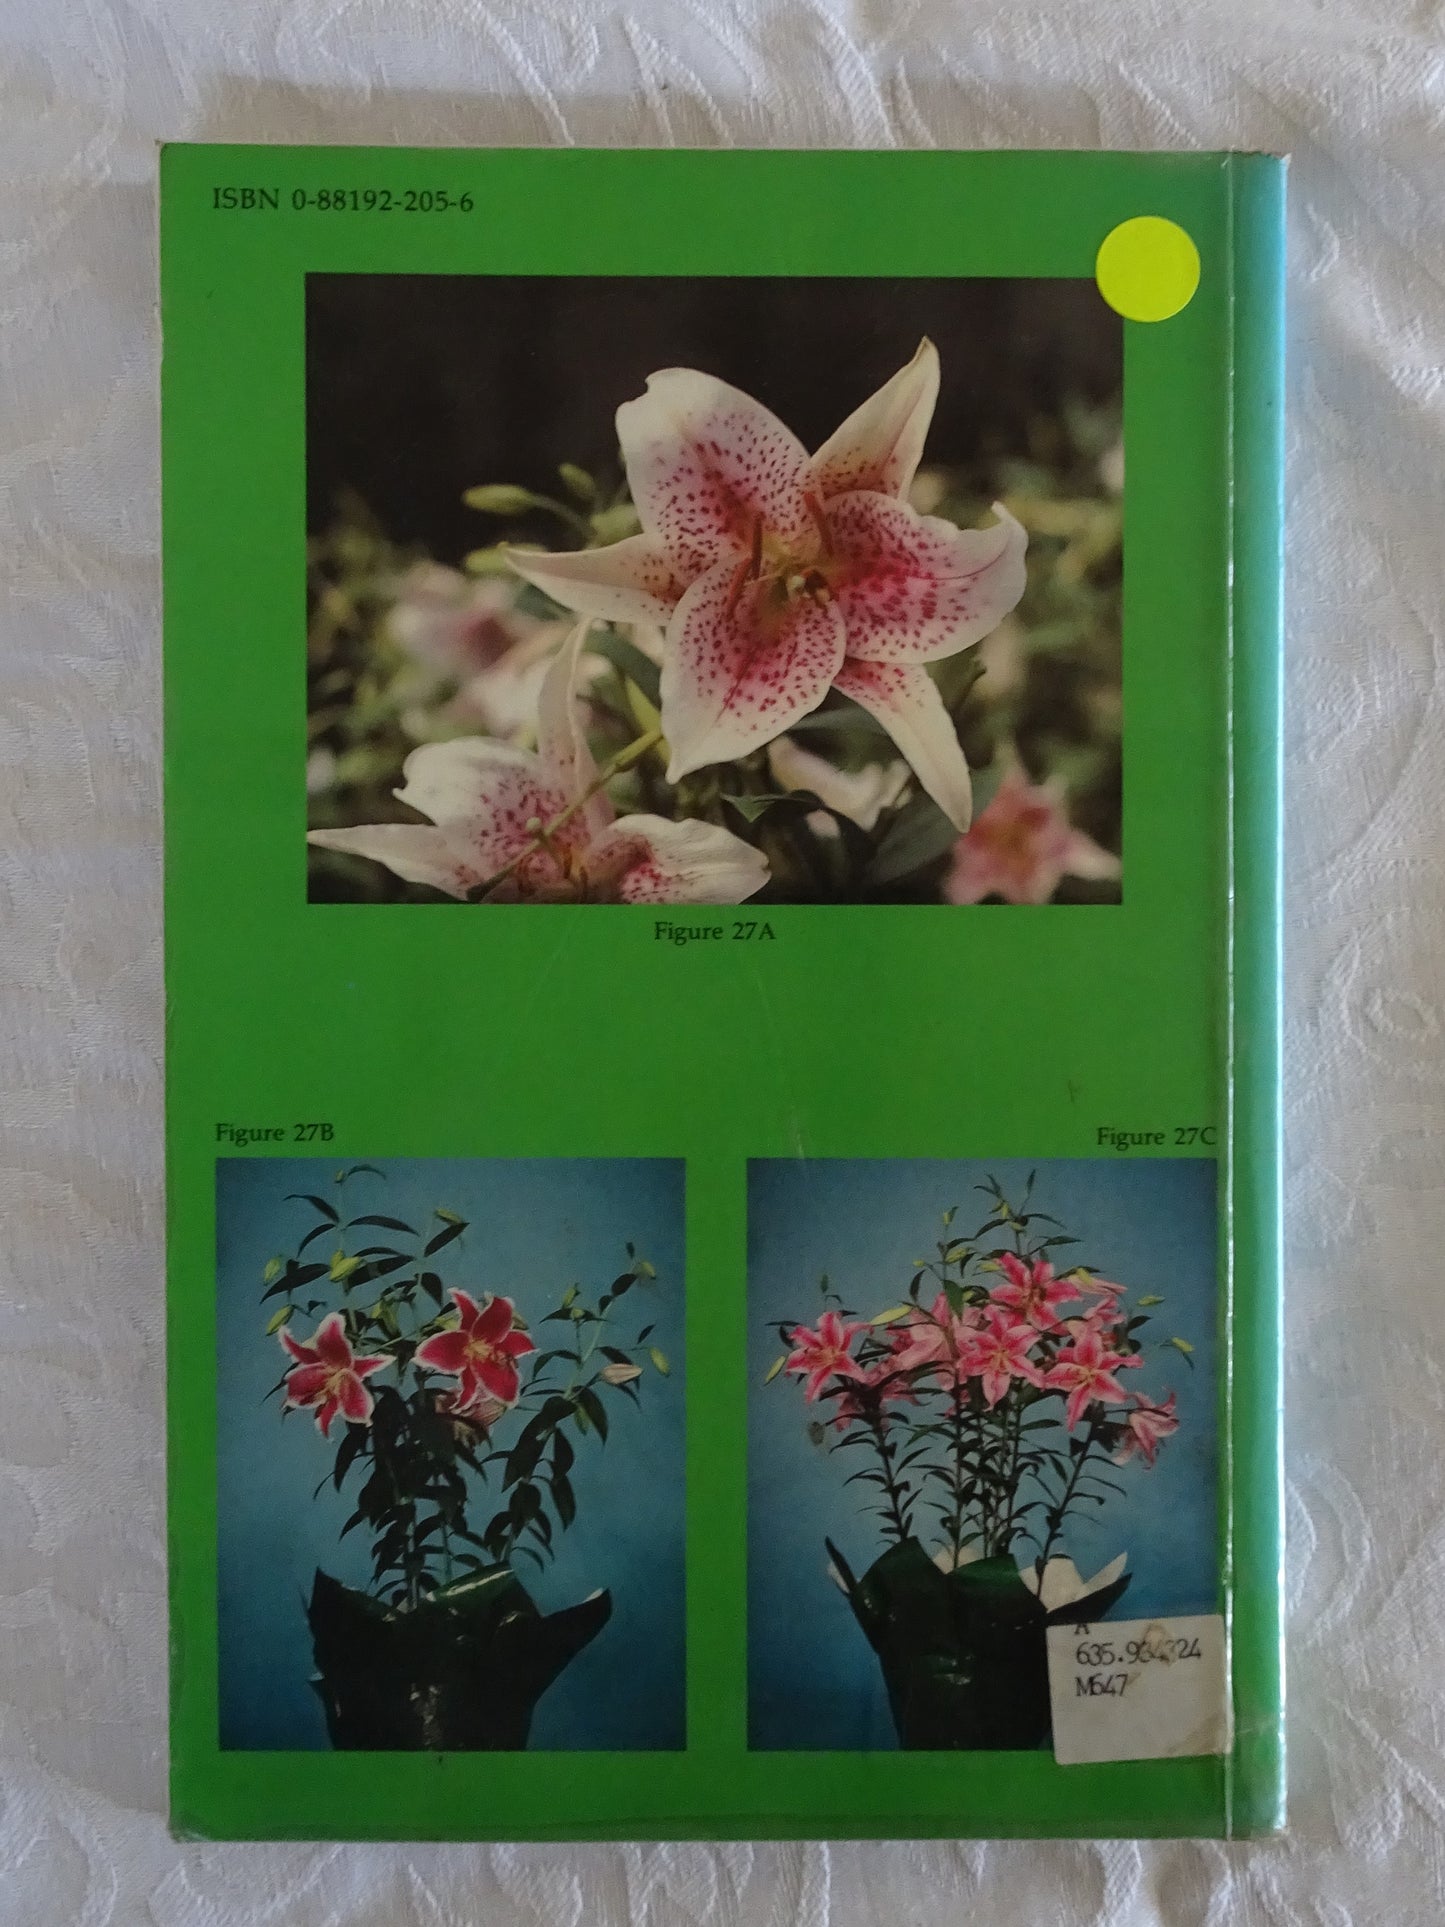 Easter And Hybrid Lily Production by William B. Miller